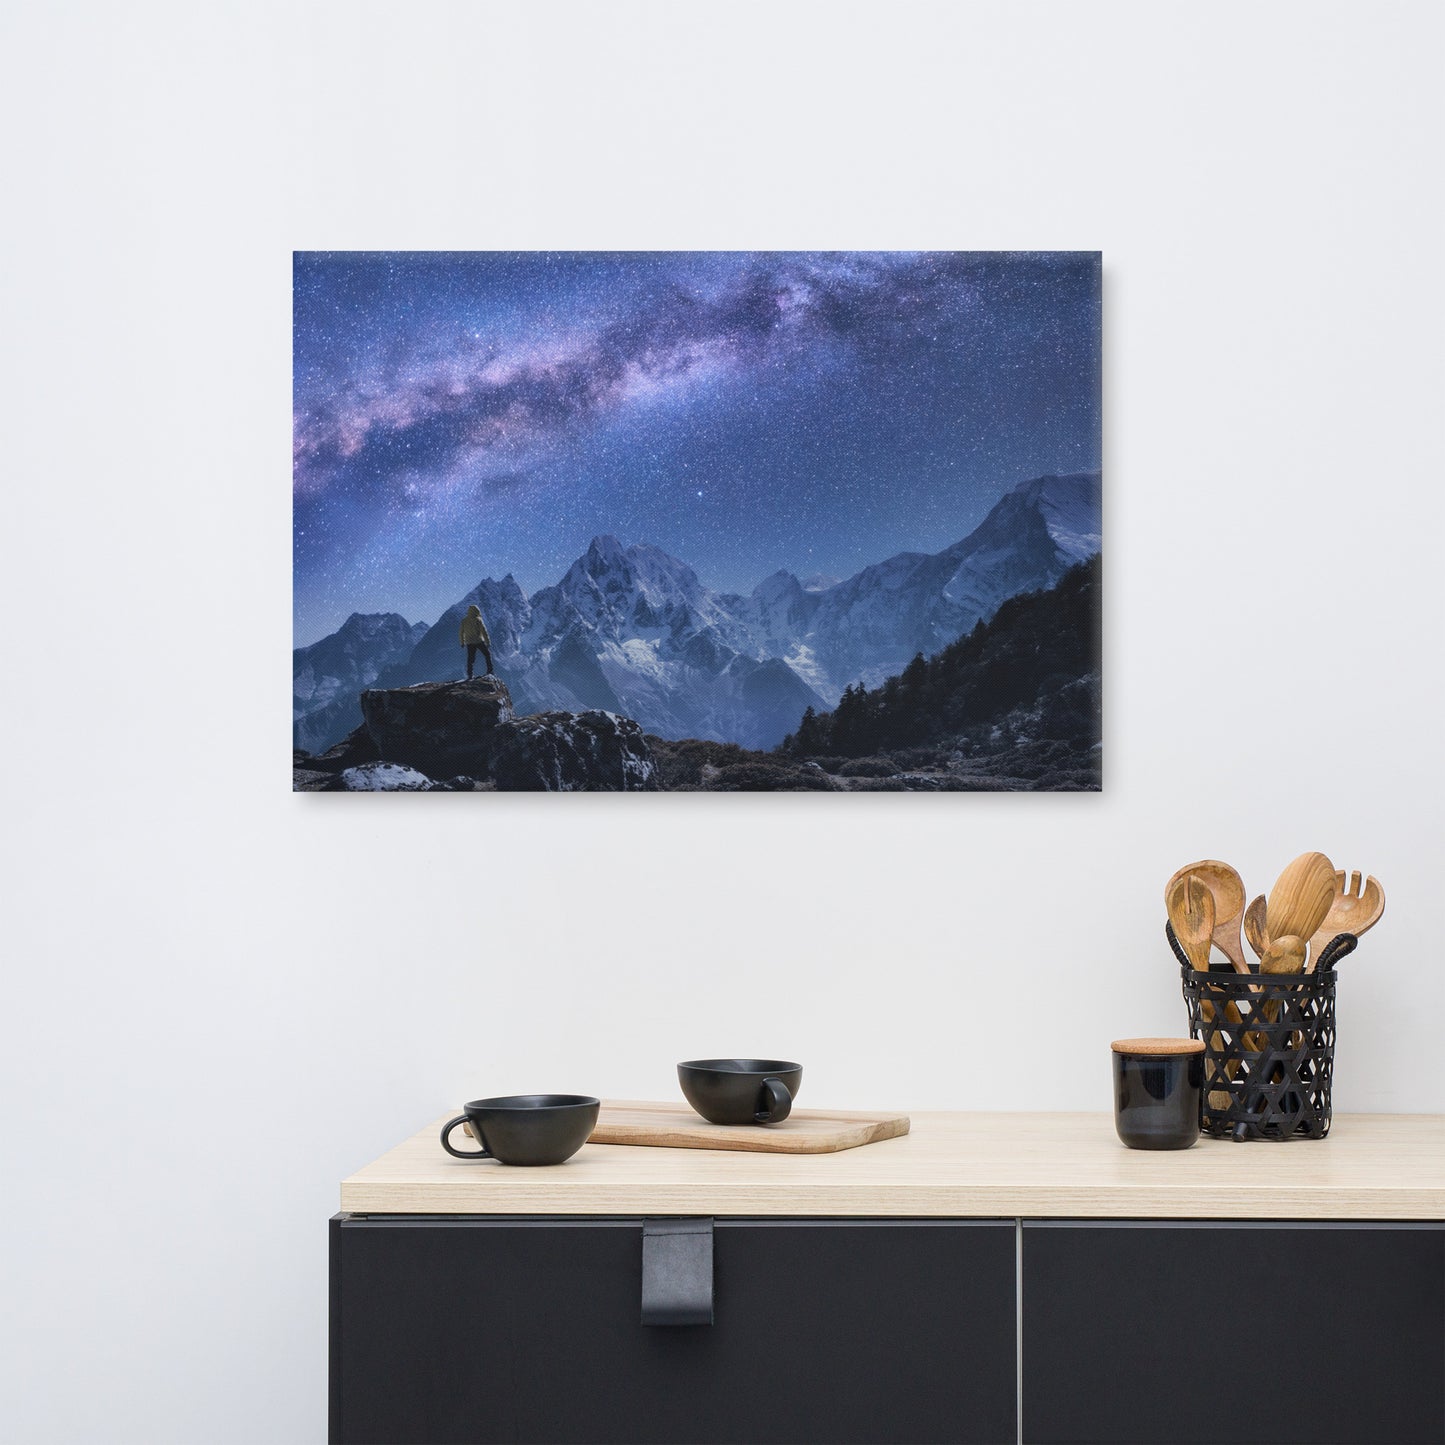 Stone Mountains and Milky Way Night Landscape Photo Canvas Wall Art Print